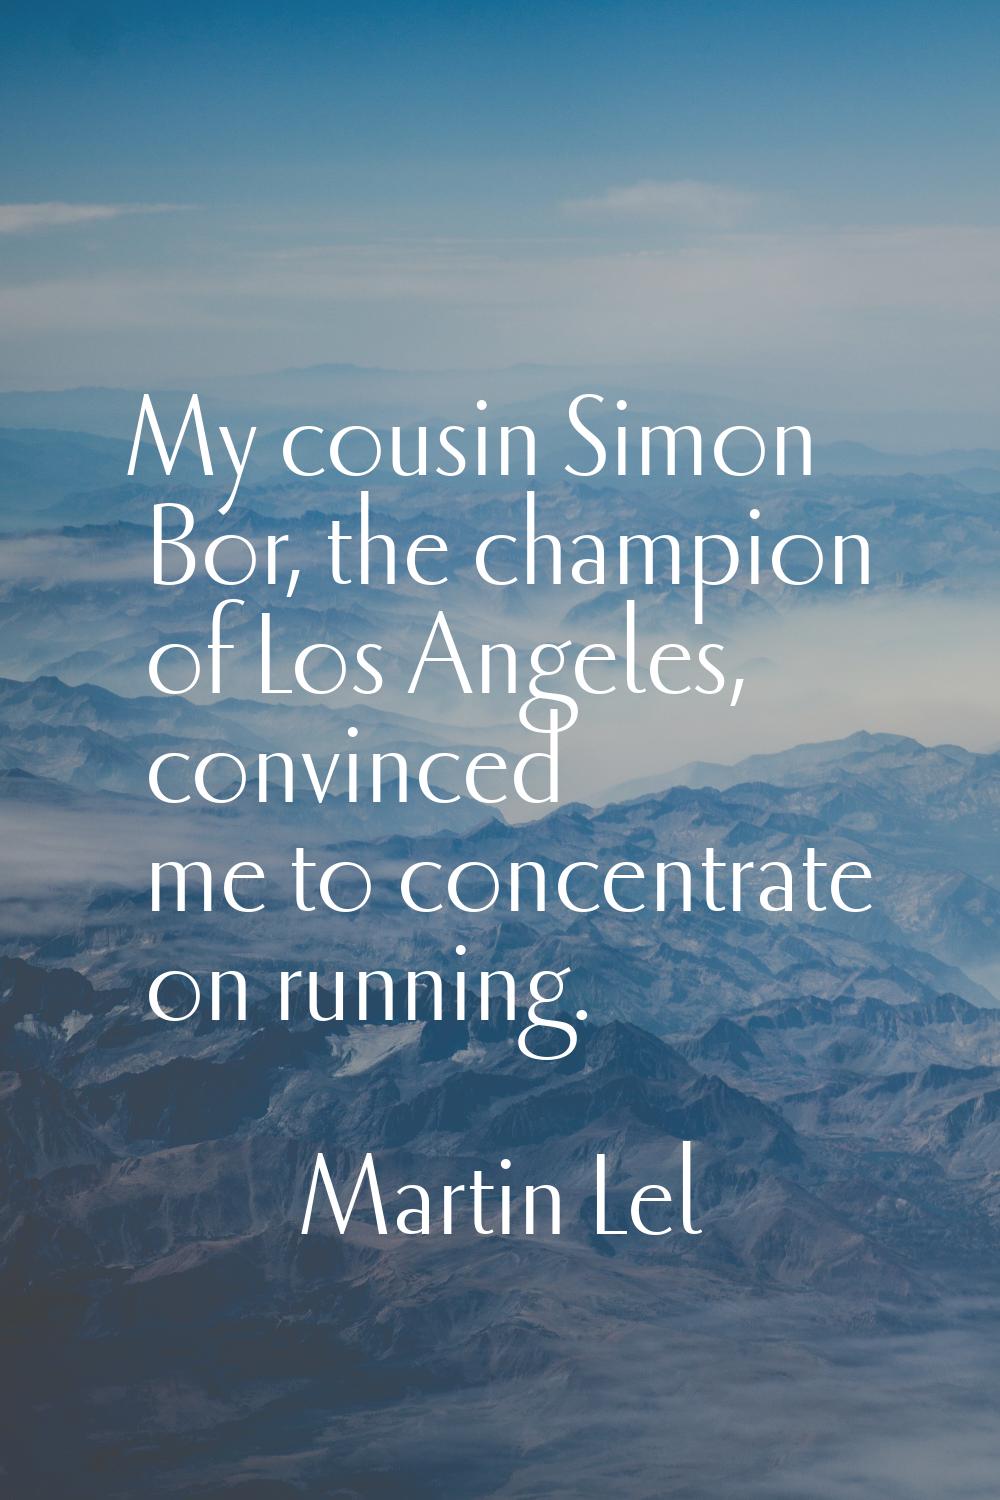 My cousin Simon Bor, the champion of Los Angeles, convinced me to concentrate on running.